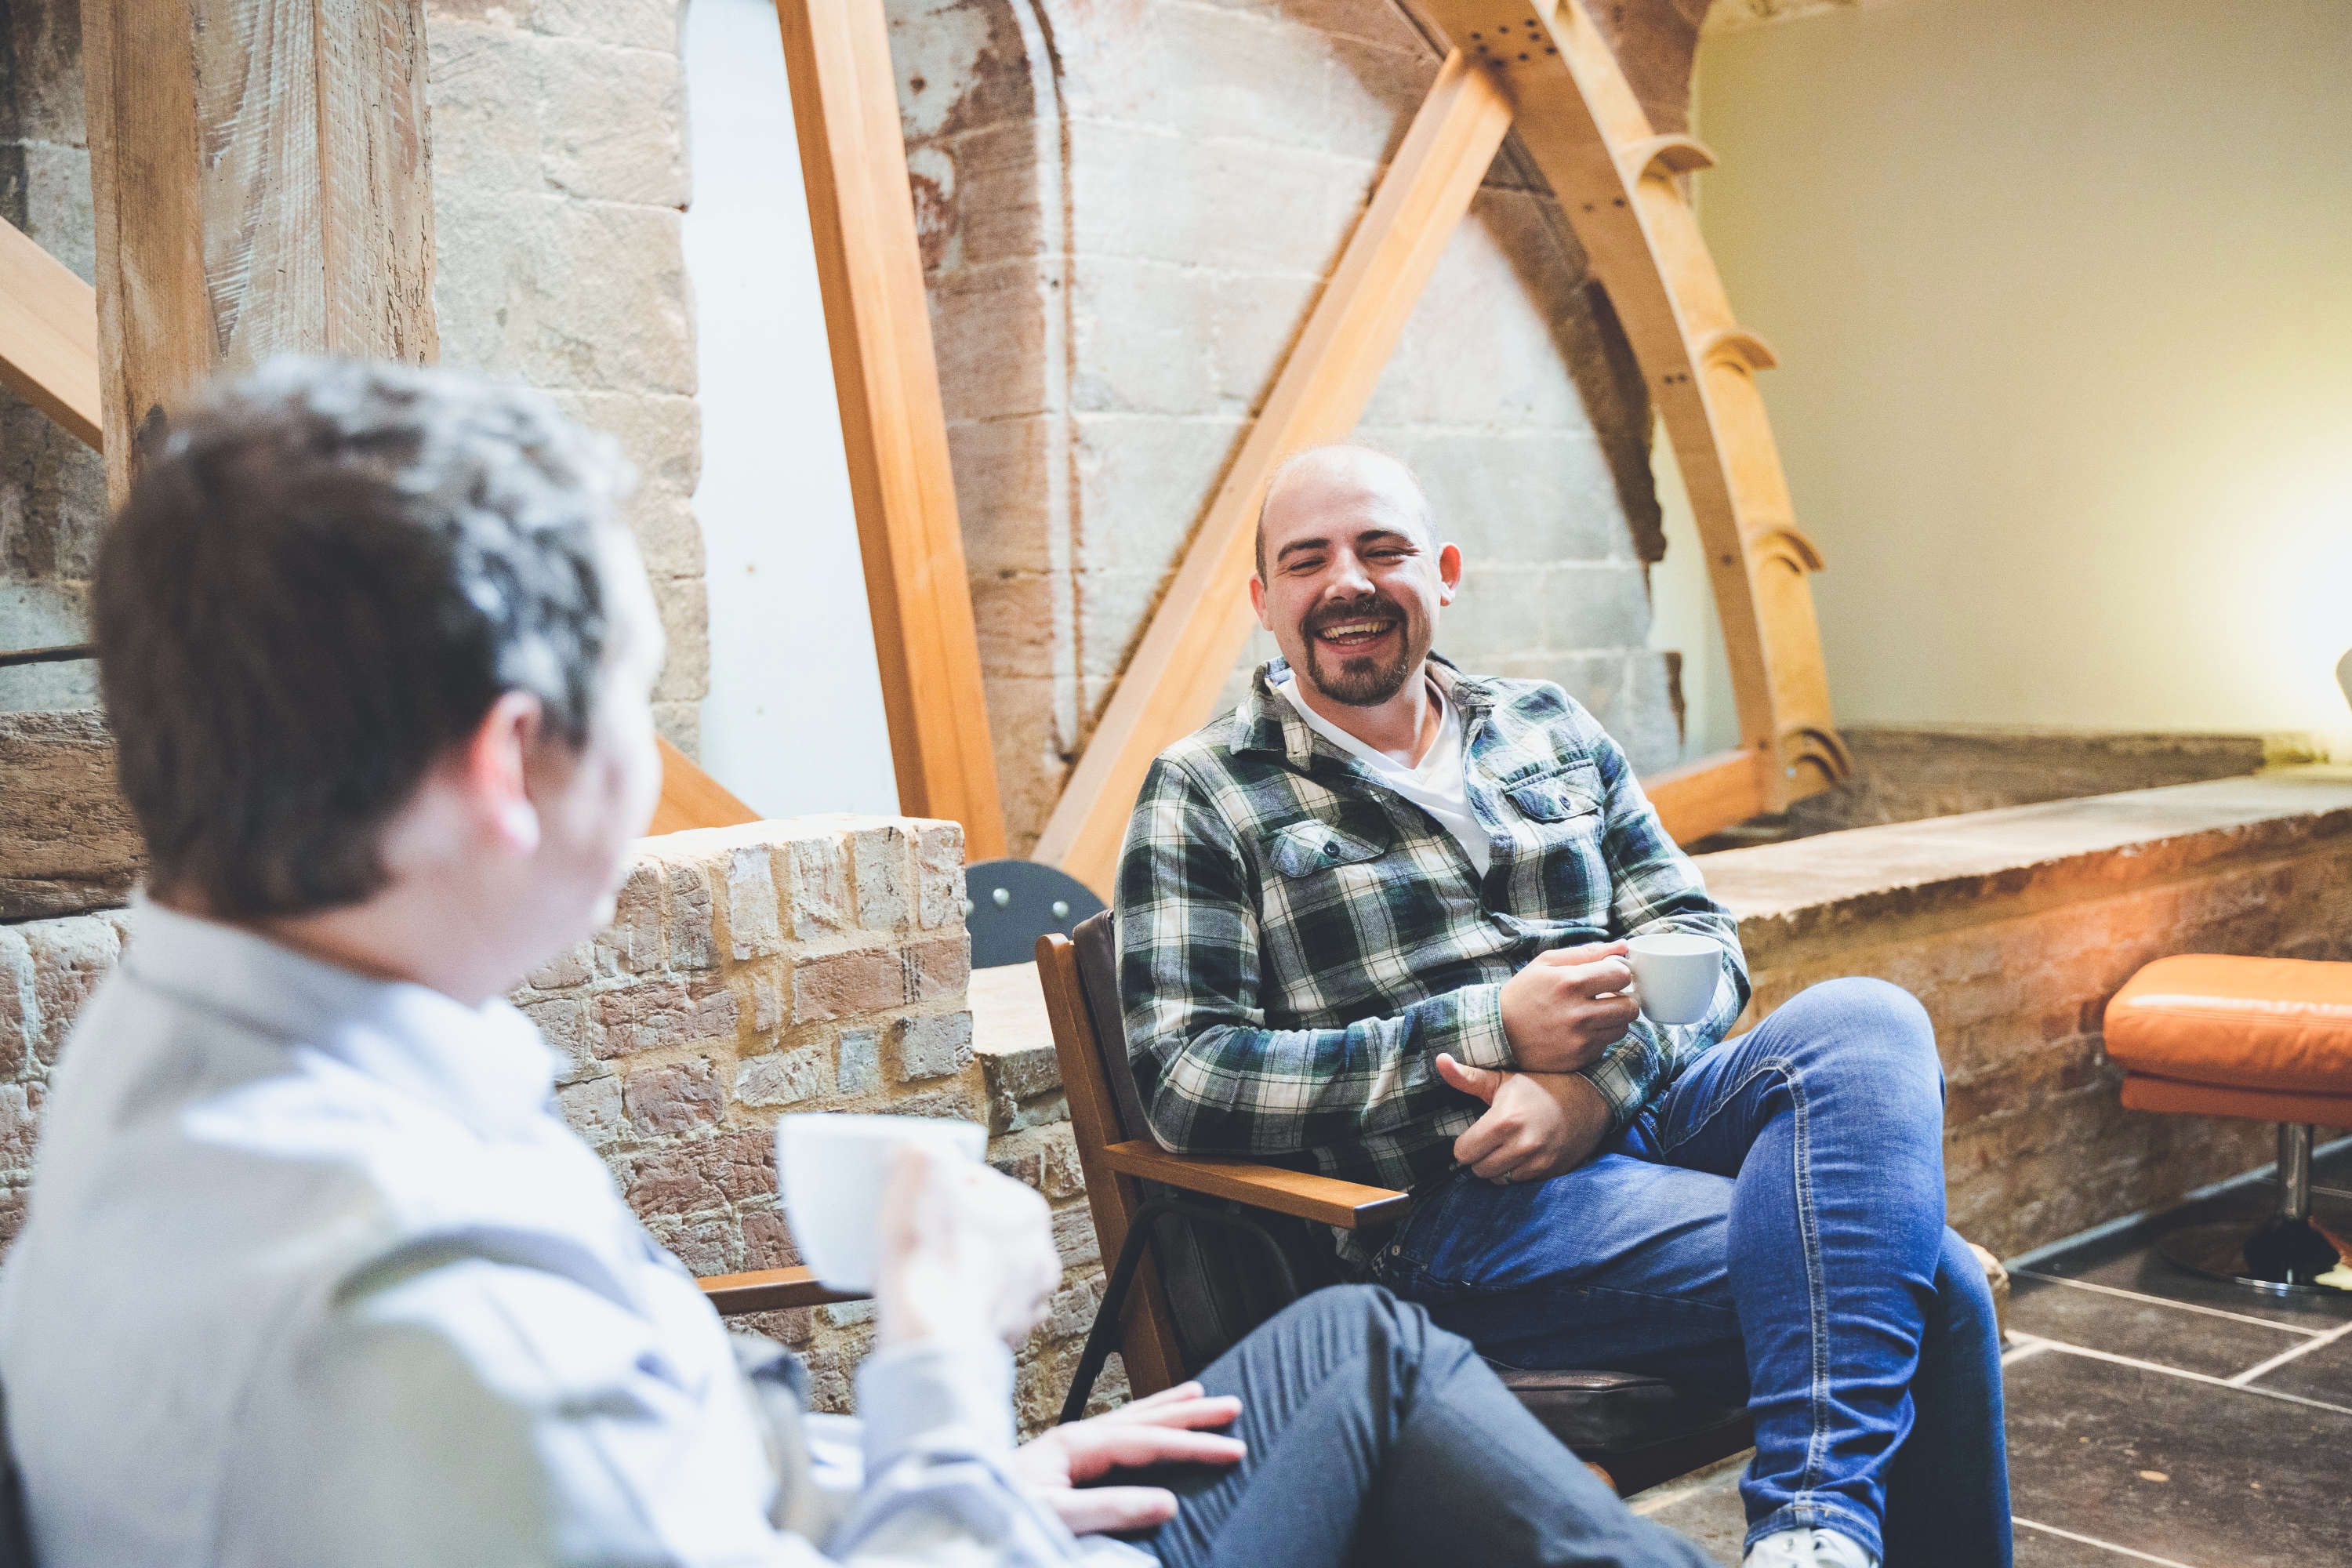 Two colleagues sit on comfy chairs in front of a rustic modern waterwheel in a social room with a relaxed studio atmosphere. Both are smiling and drinking coffee.